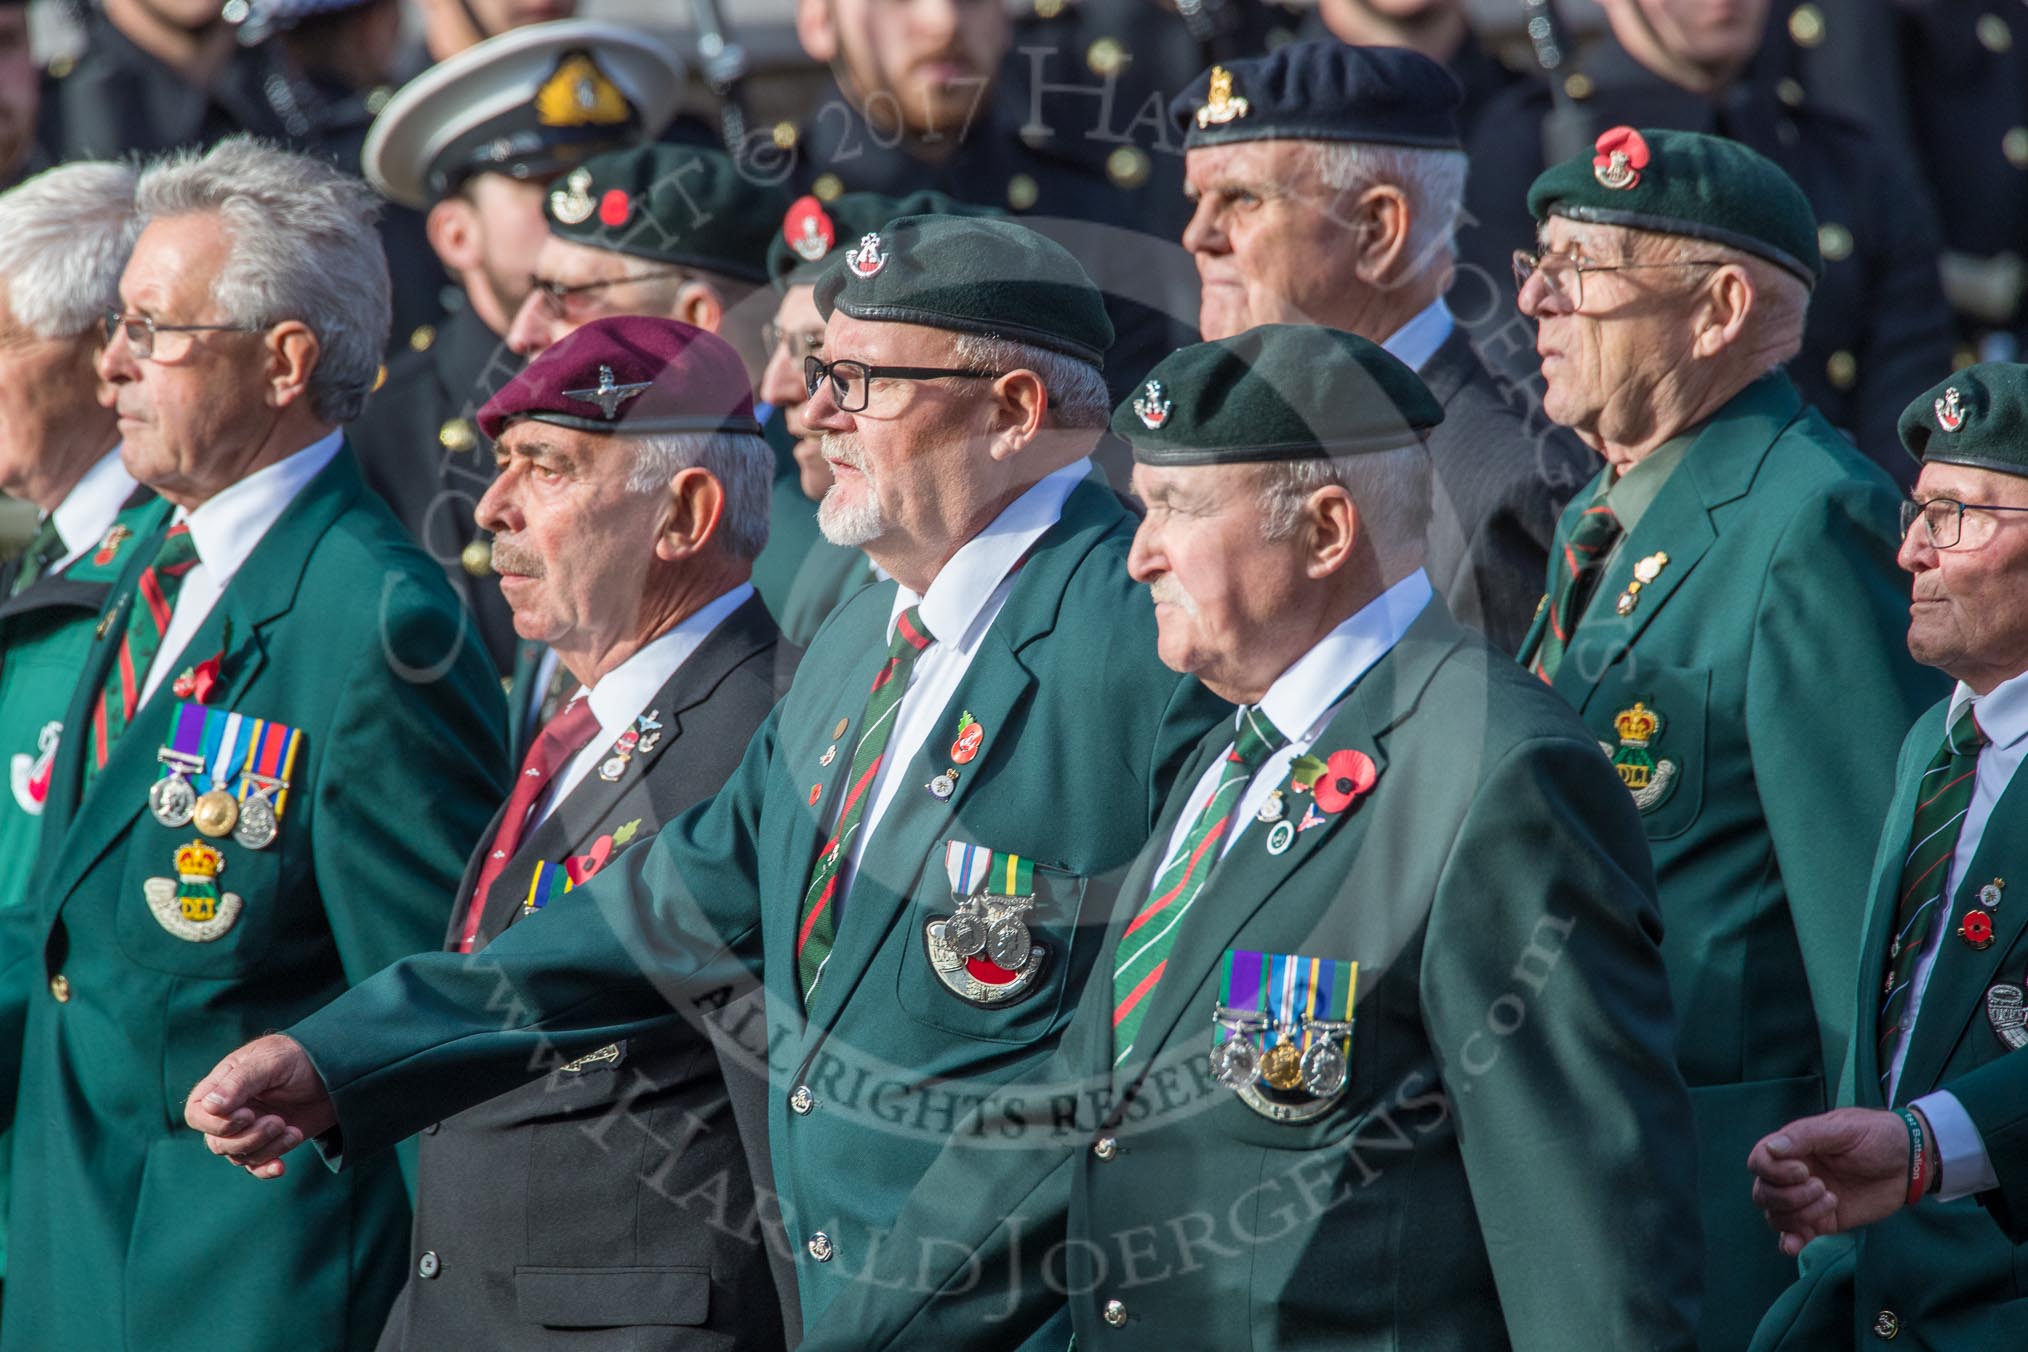 Durham Light Infantry Association (Group A5, 27 members) during the Royal British Legion March Past on Remembrance Sunday at the Cenotaph, Whitehall, Westminster, London, 11 November 2018, 11:56.